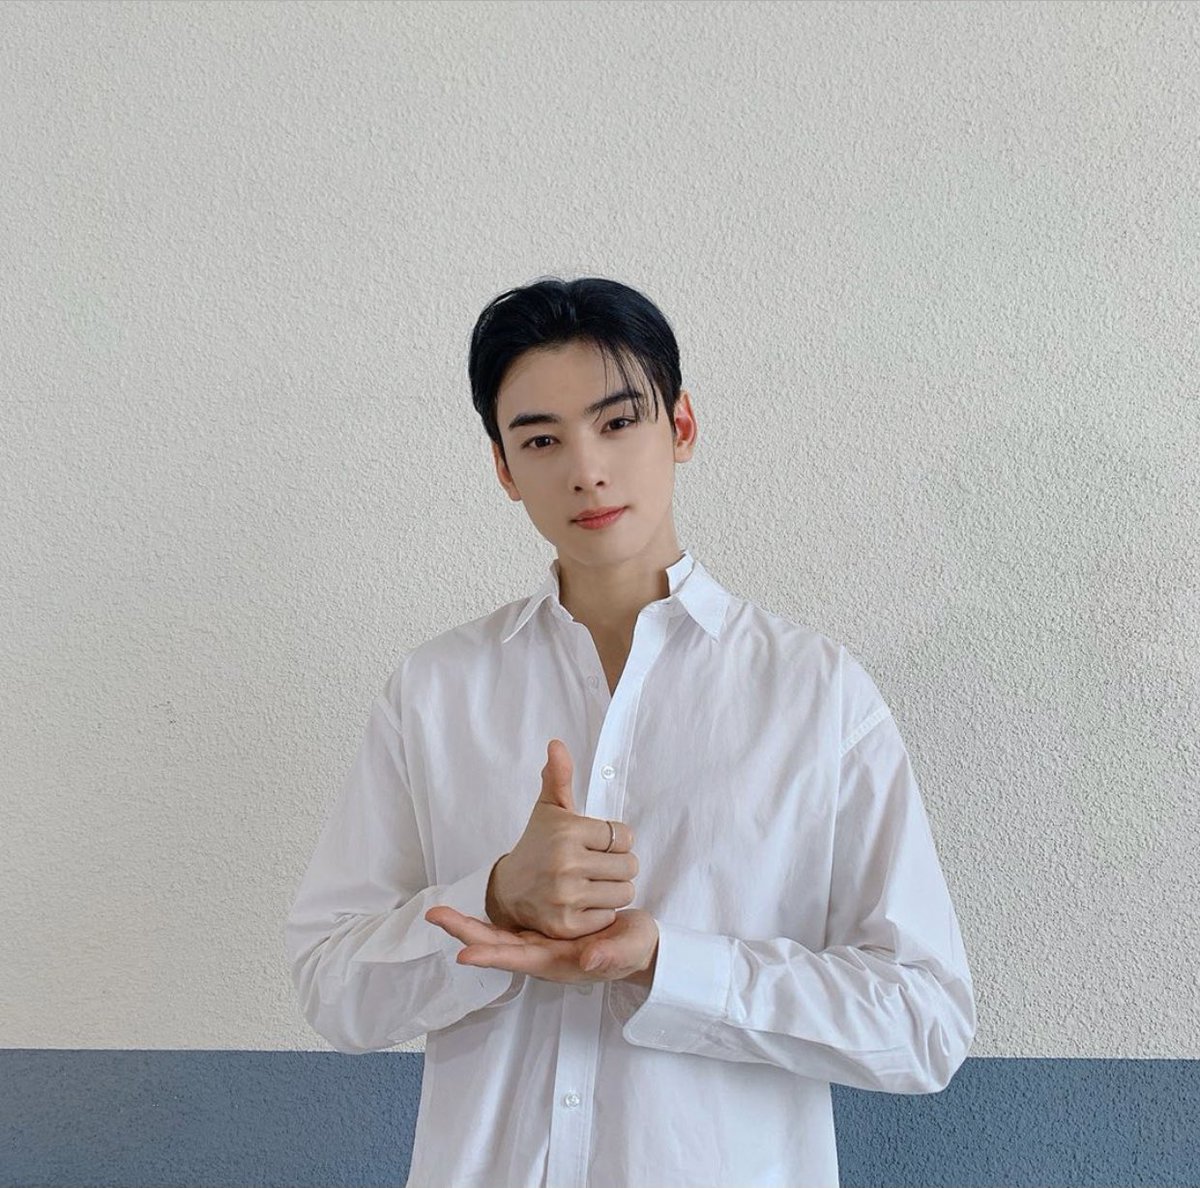 You all are foolin' no one”: Netizens defend Cha Eun-woo pulling